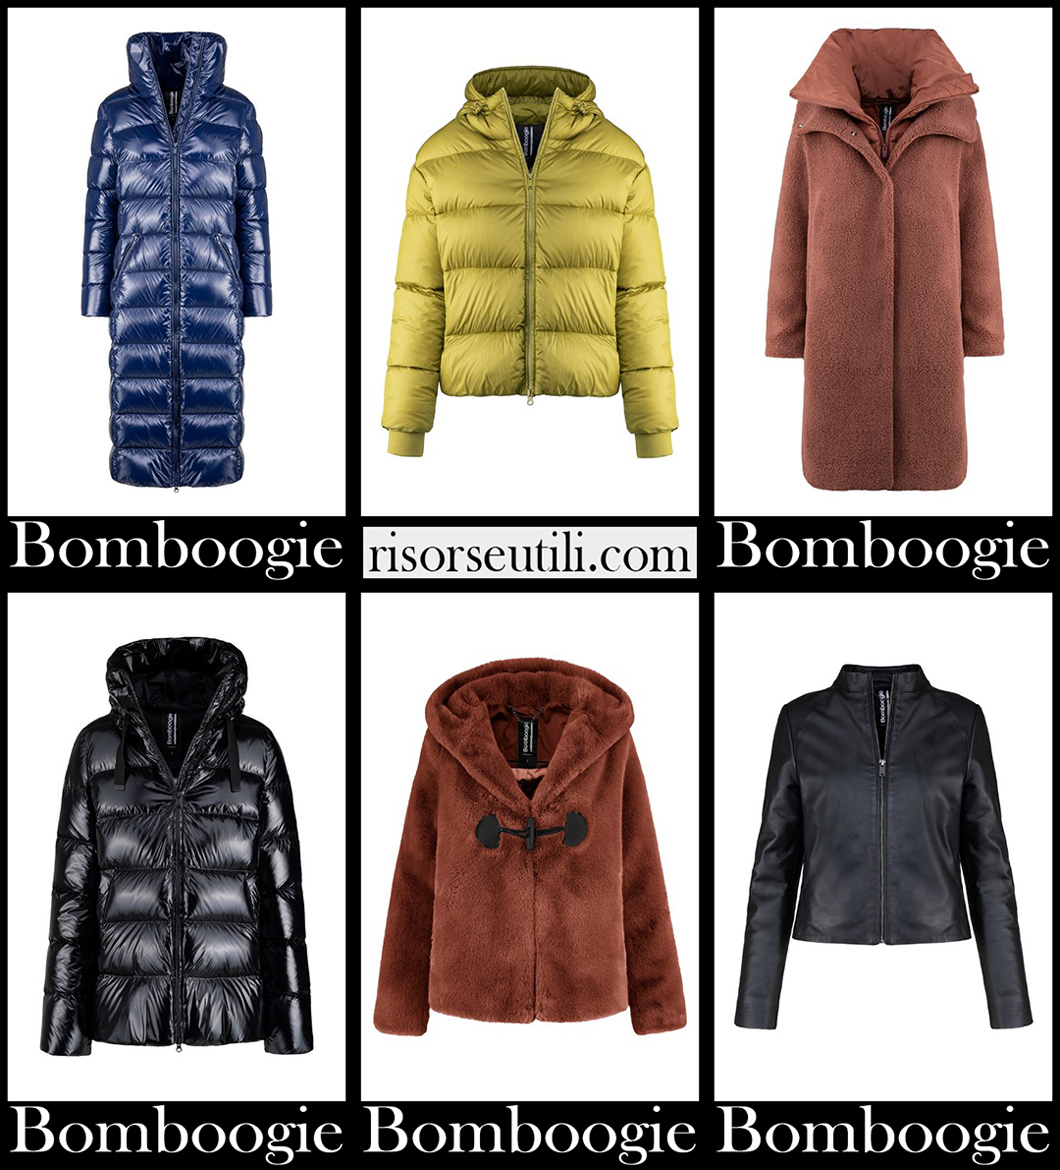 Bomboogie jackets 20-2021 fall winter men's collection